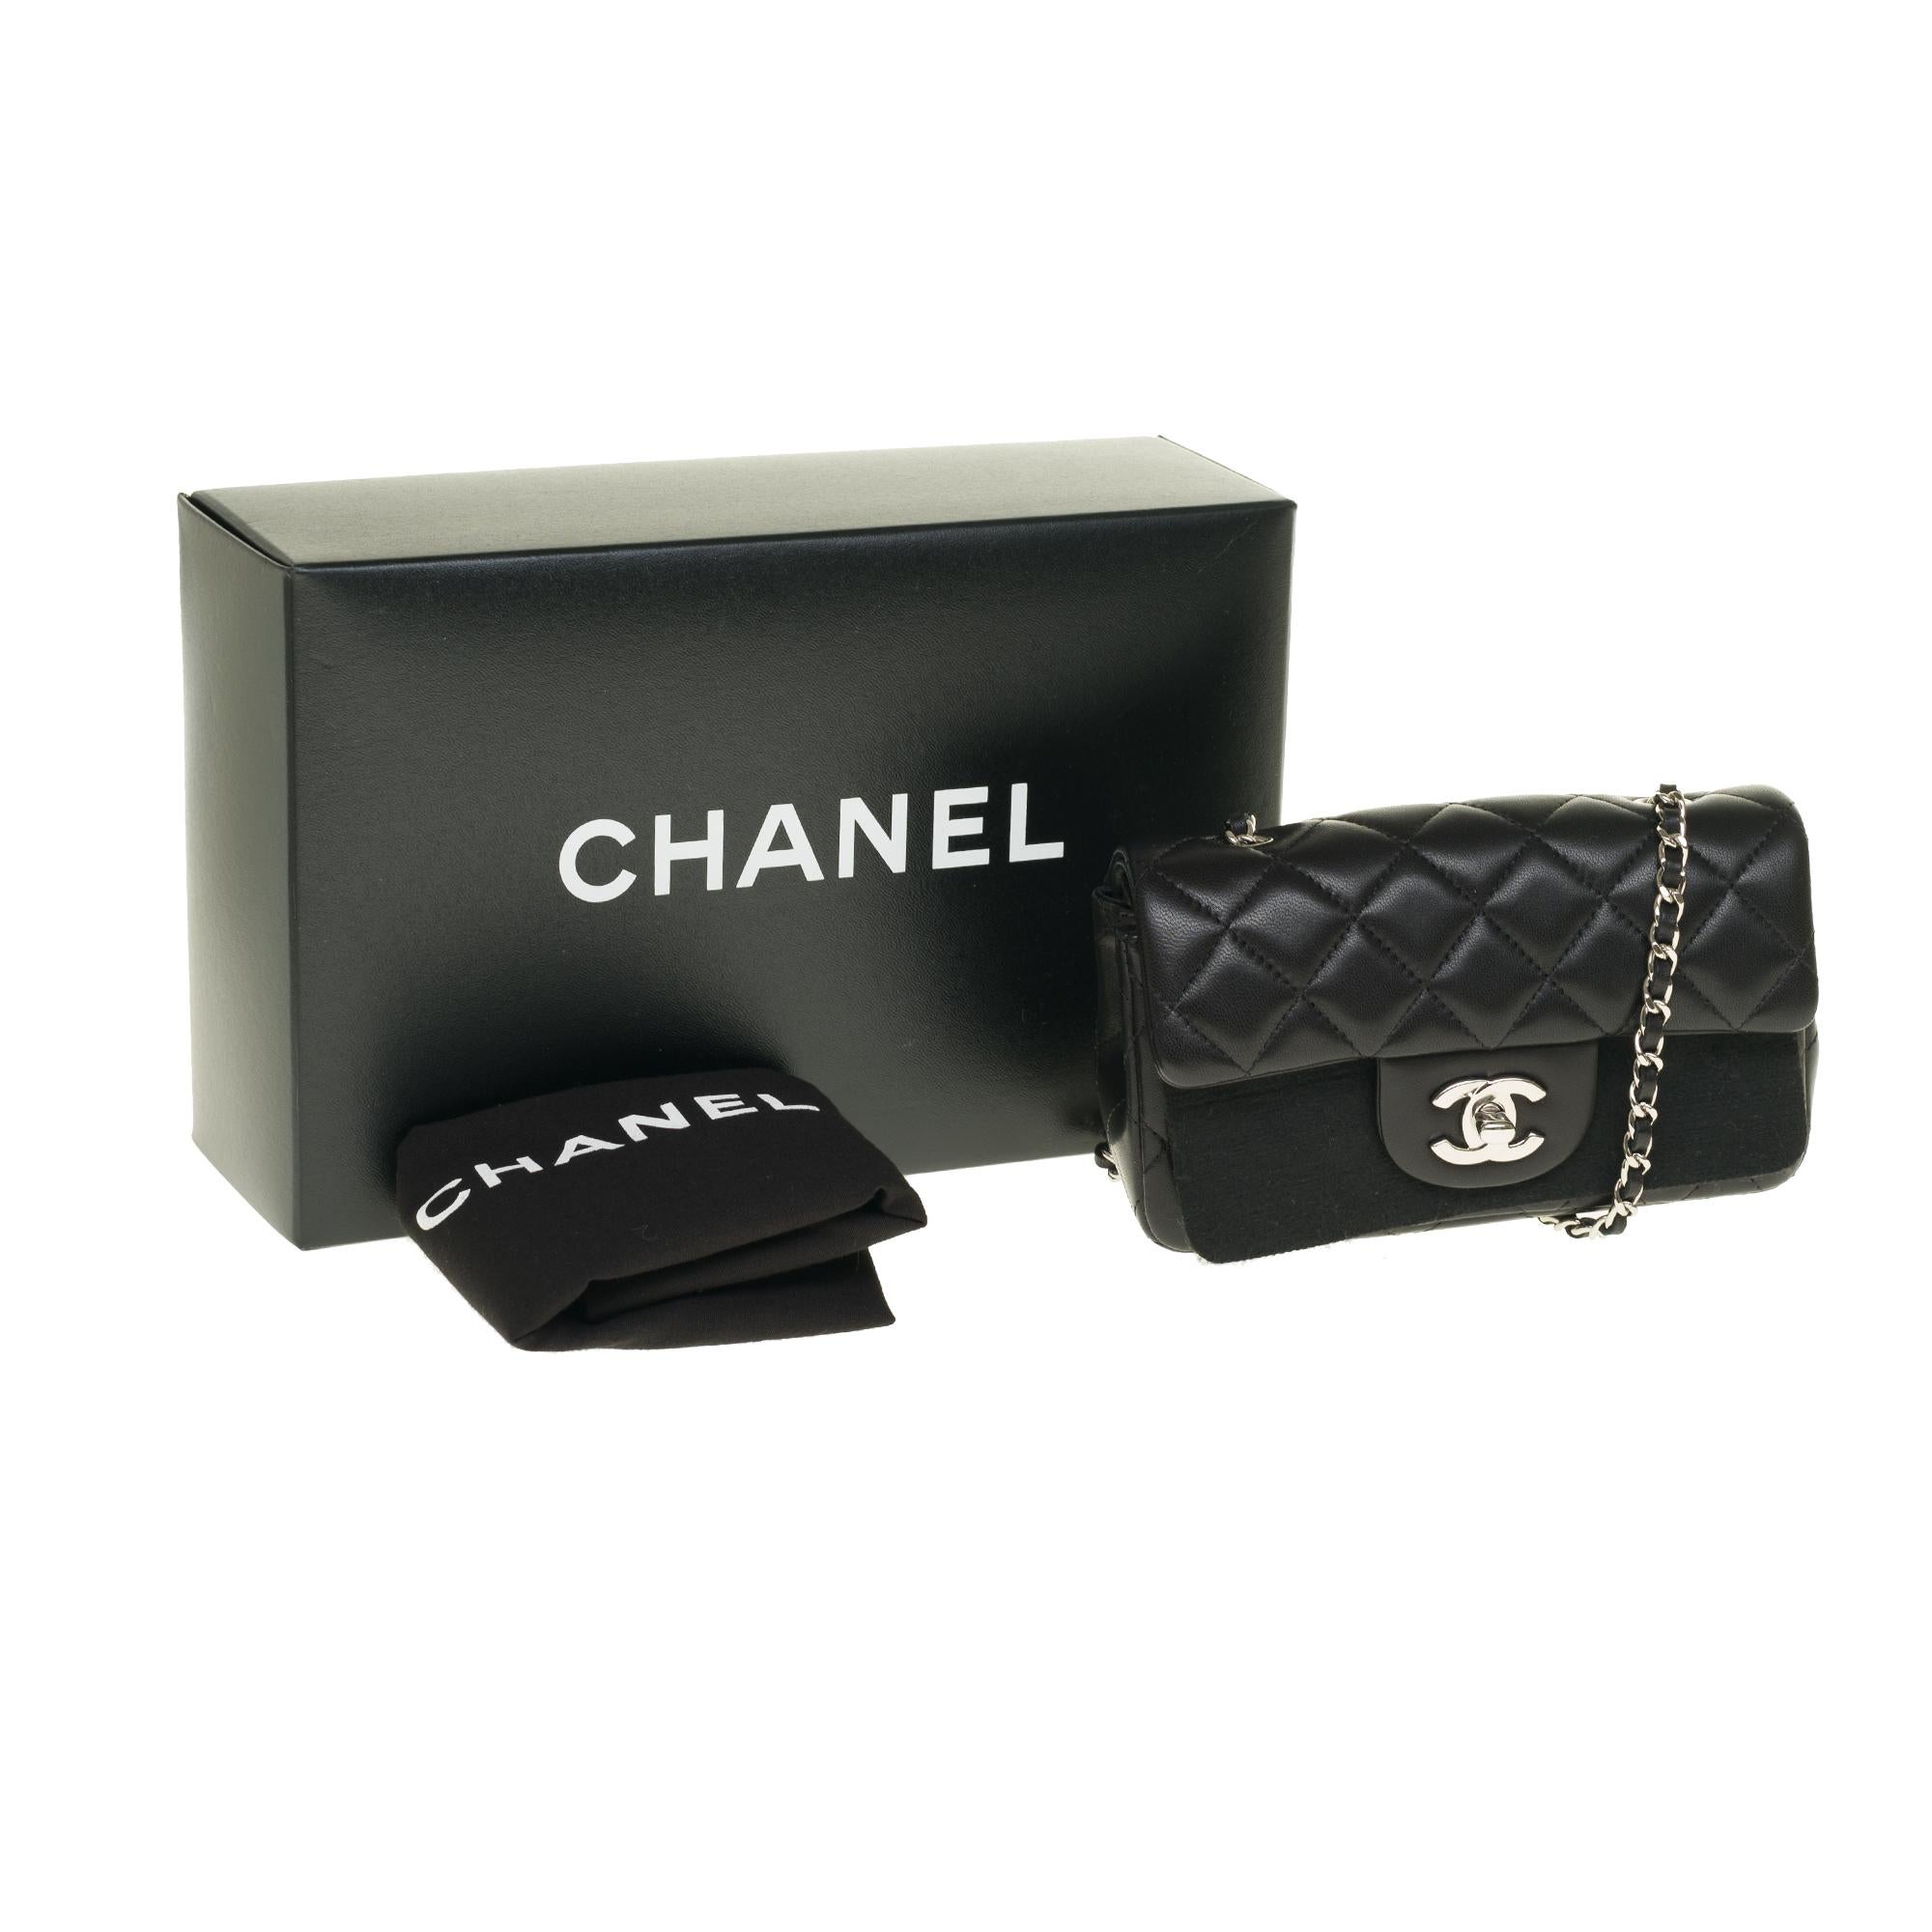 Chanel Mini square handbag in black quilted leather, Silver hardware 4